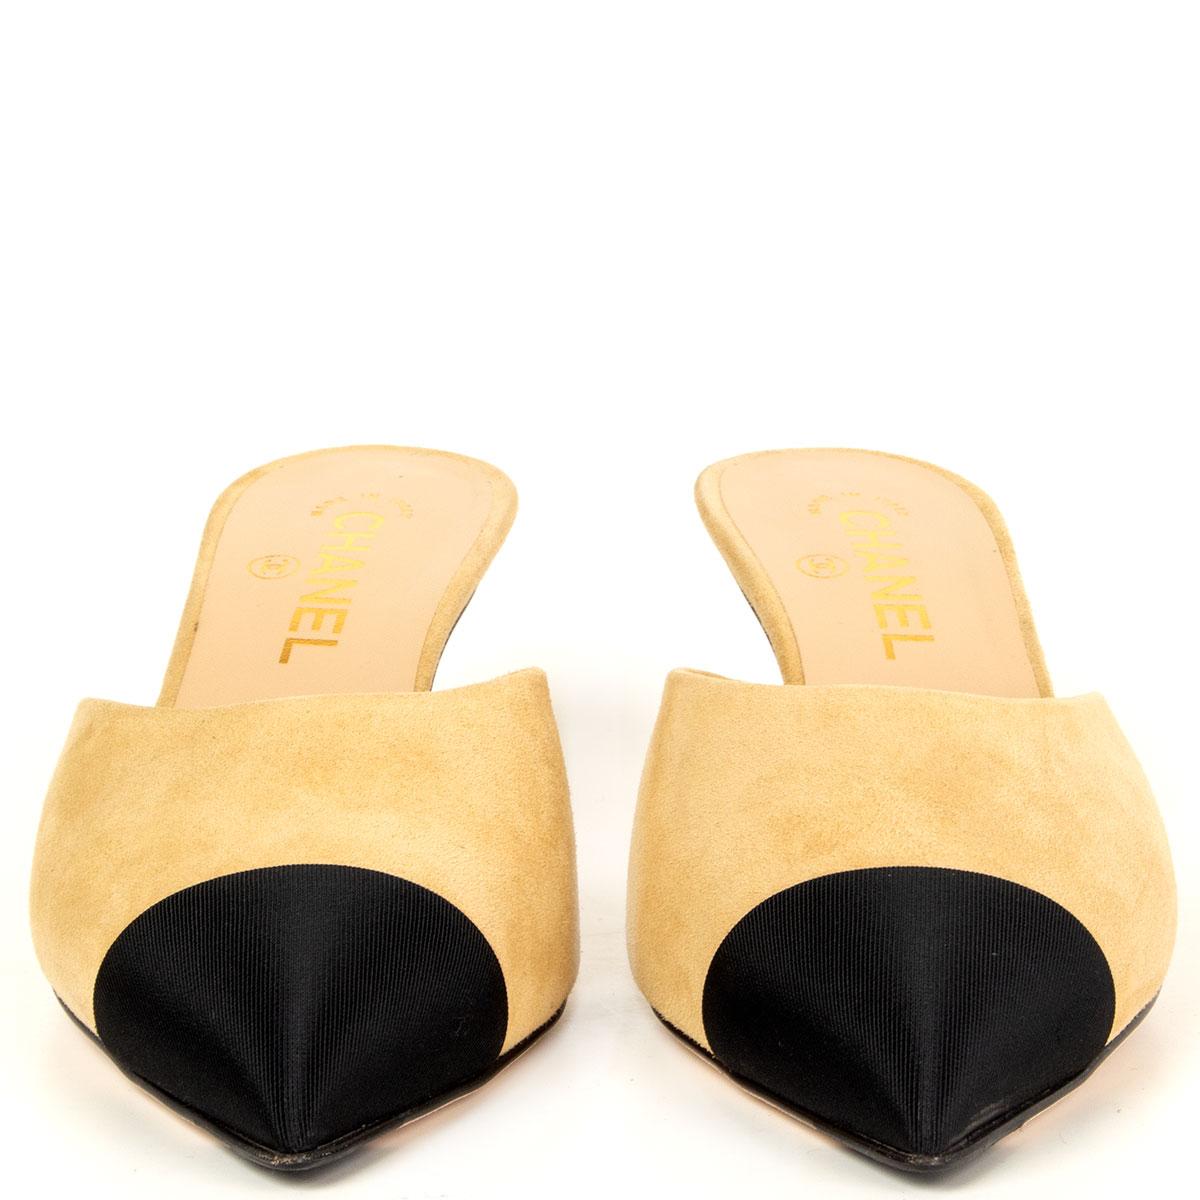 100% authentic Chanel pointed-toe kitten-heel mules in beige suede featuring a classic black grosgrain tip. Have been worn once inside and are in virtually new condition. Come with dust bag. 

Measurements
Imprinted Size	39C
Shoe Size	39
Inside